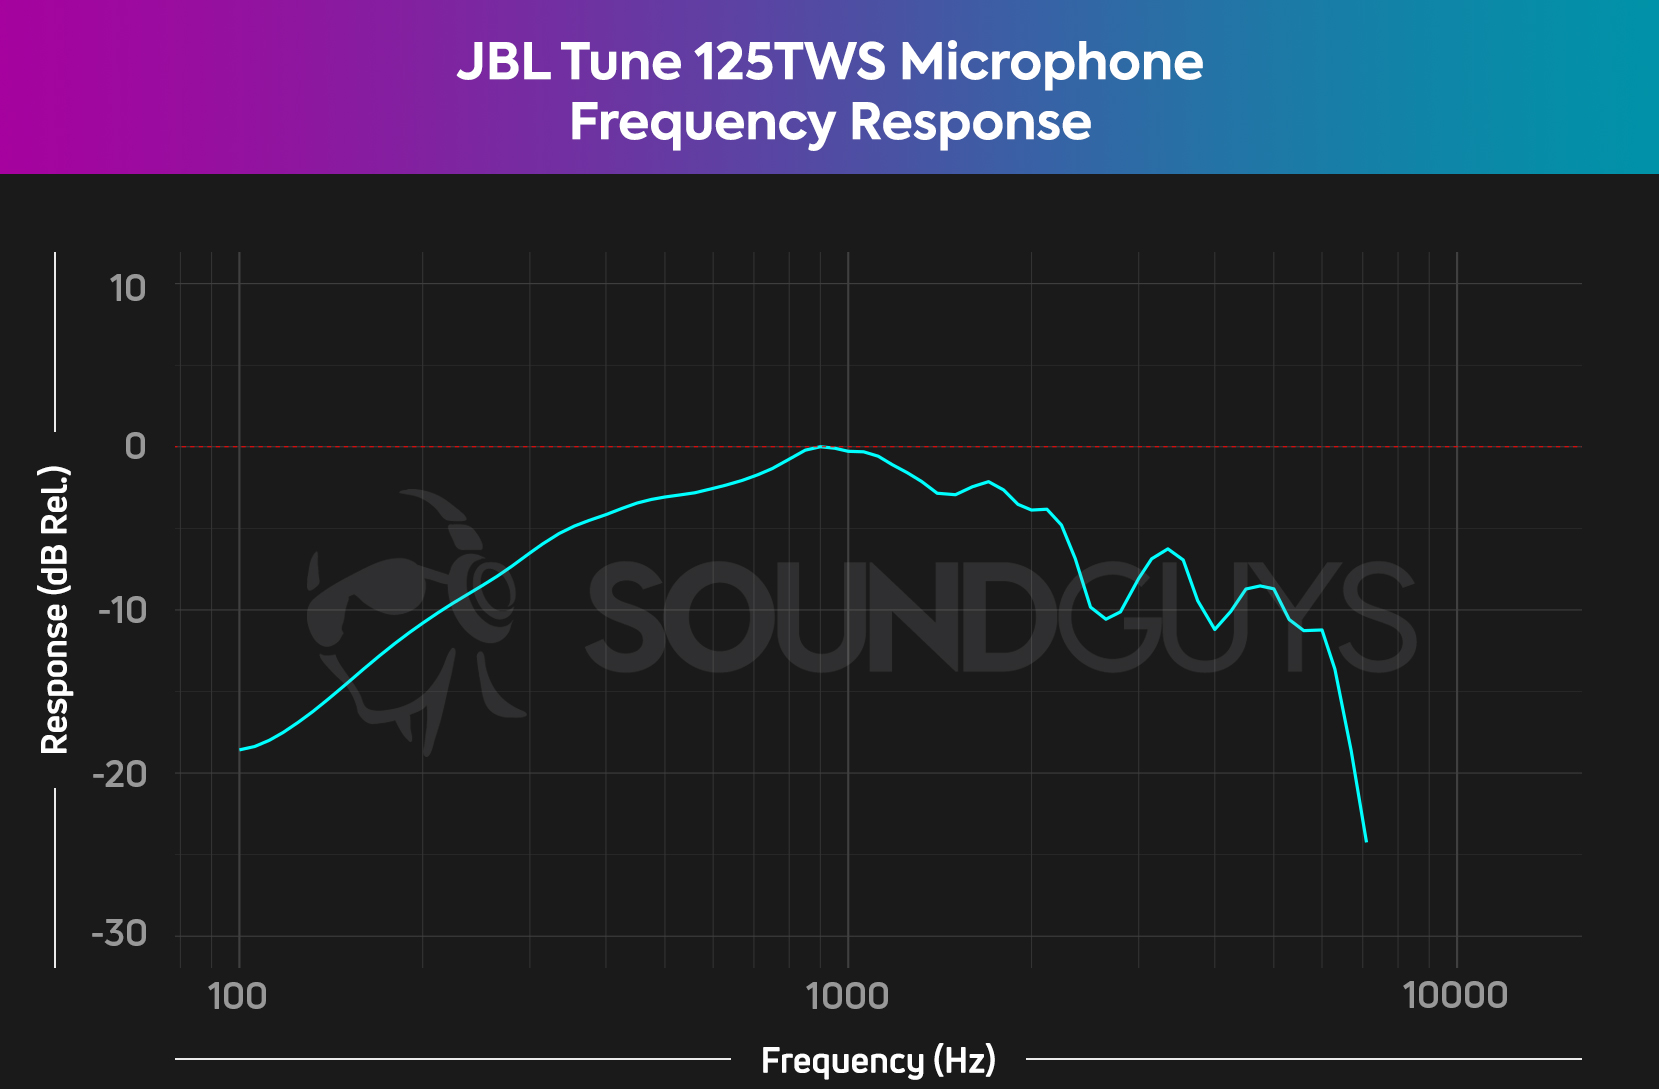 This chart shows the microphone frequency response on the JBL Tune 125TWS.